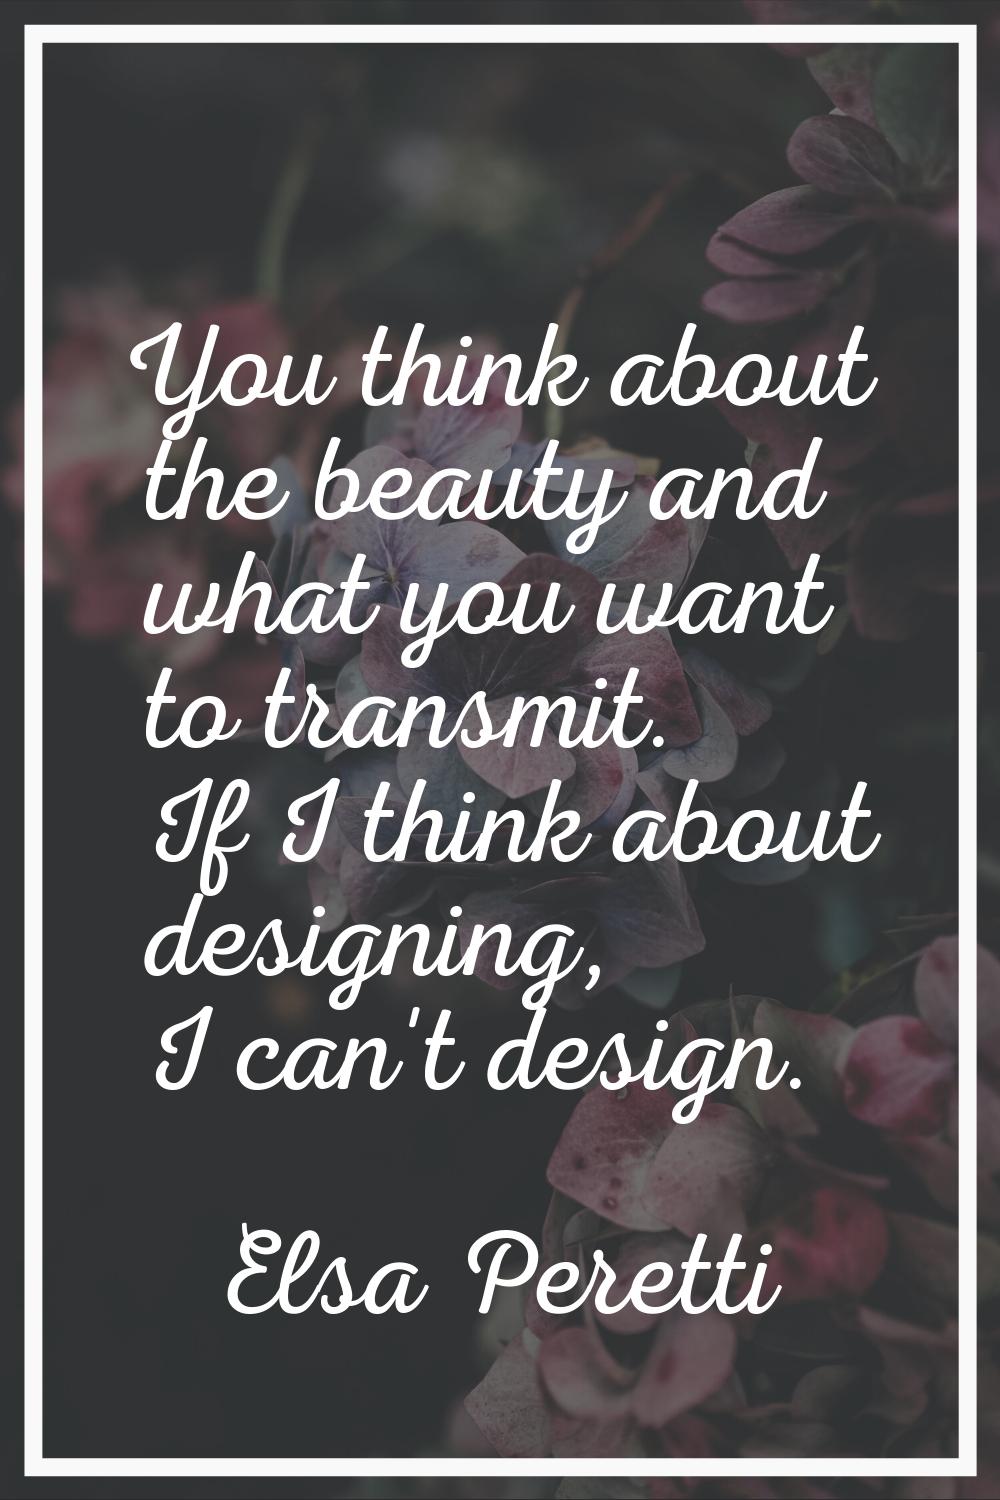 You think about the beauty and what you want to transmit. If I think about designing, I can't desig